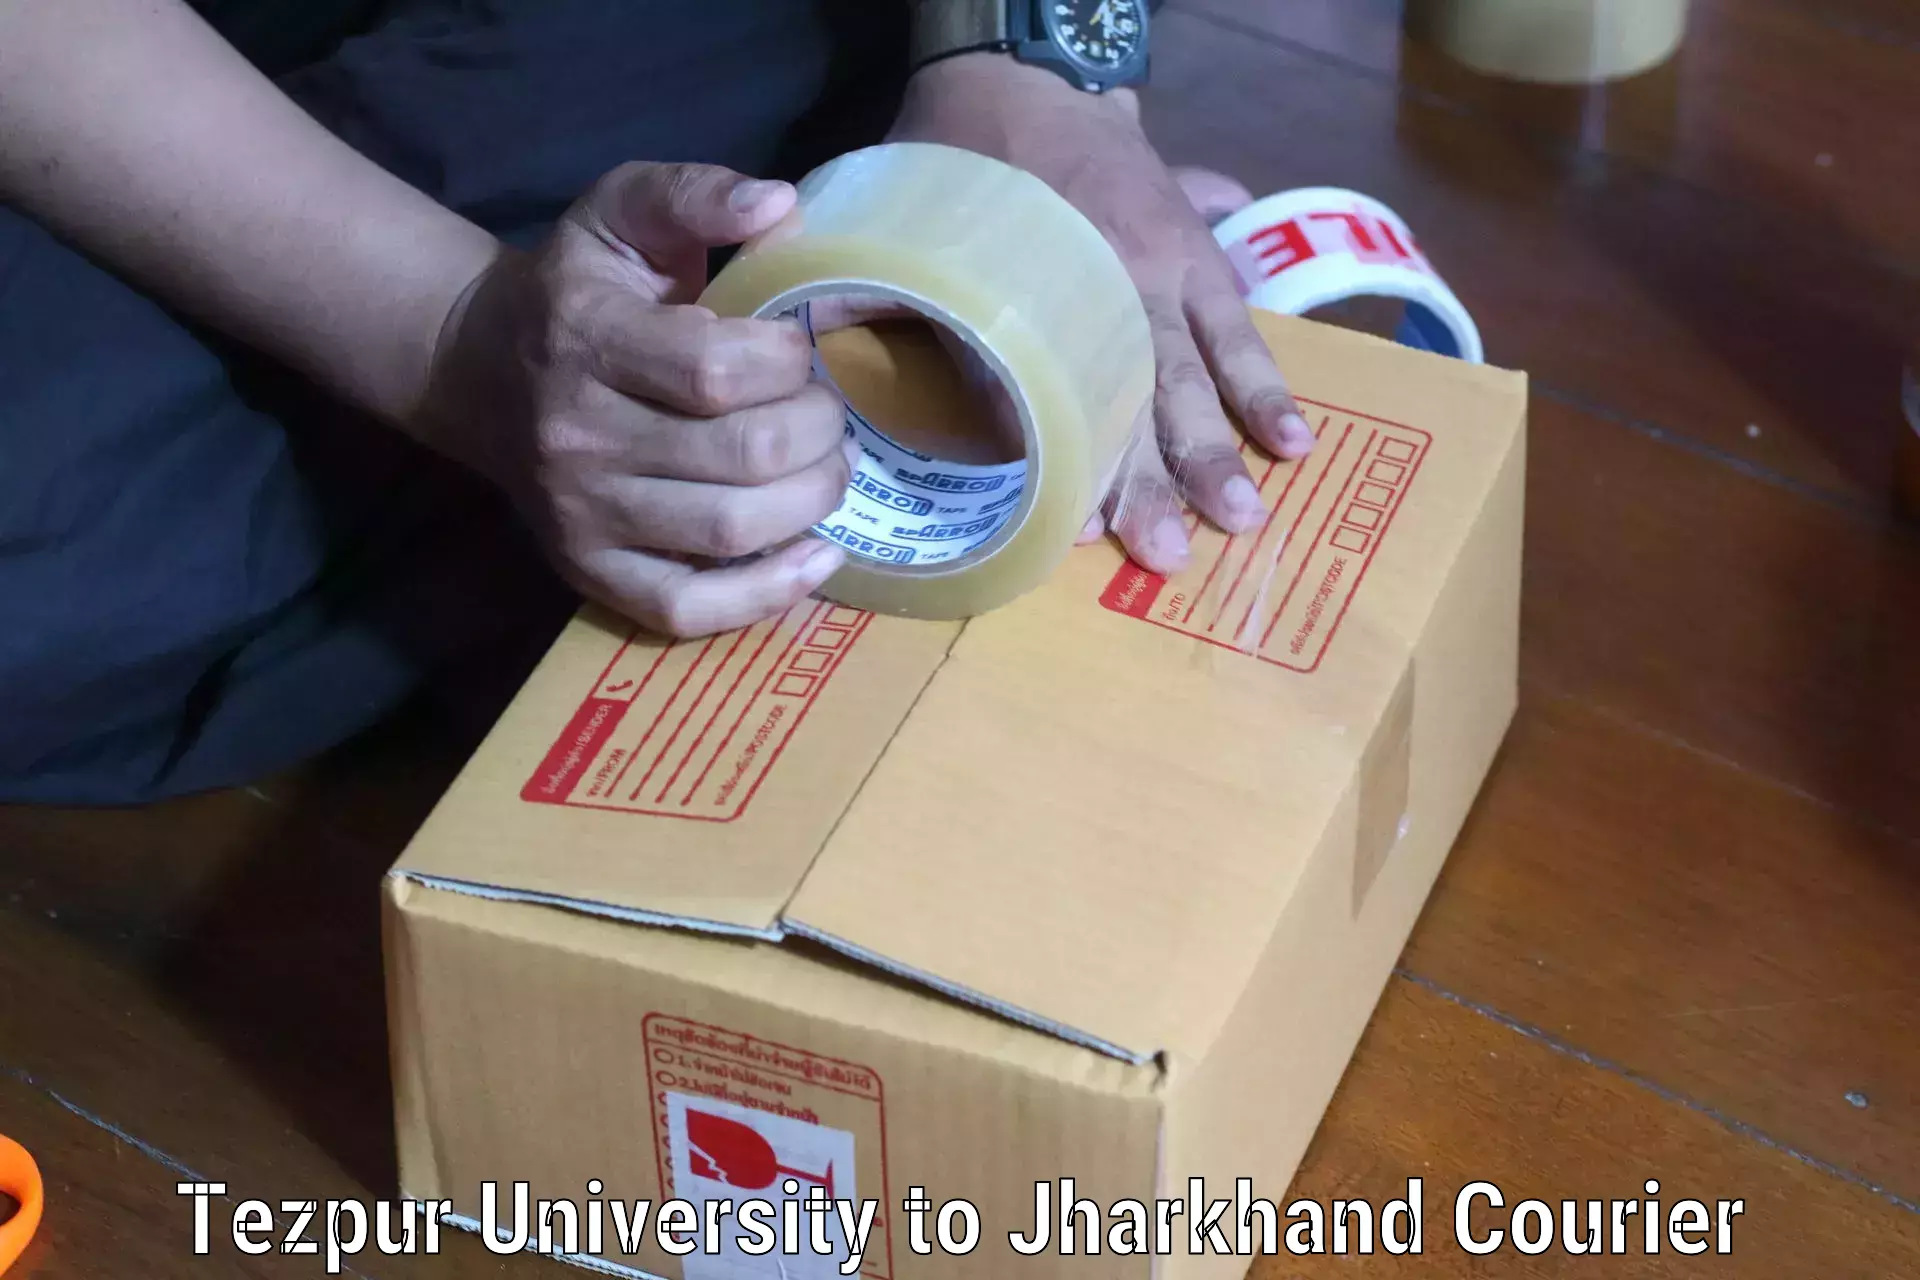 Easy access courier services Tezpur University to Chandwa